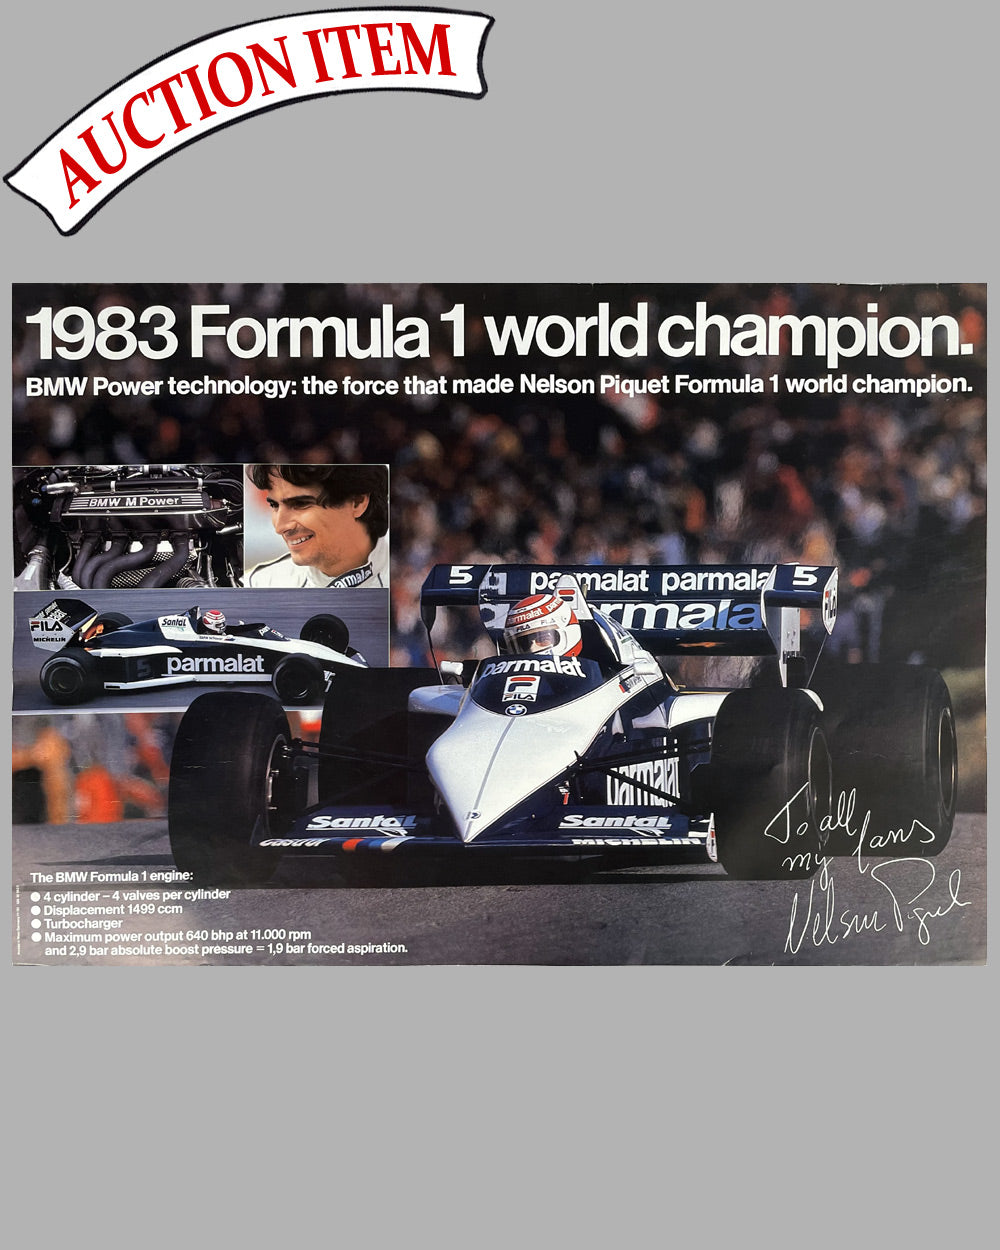 6 - BMW factory poster celebrating their 1983 World Championship